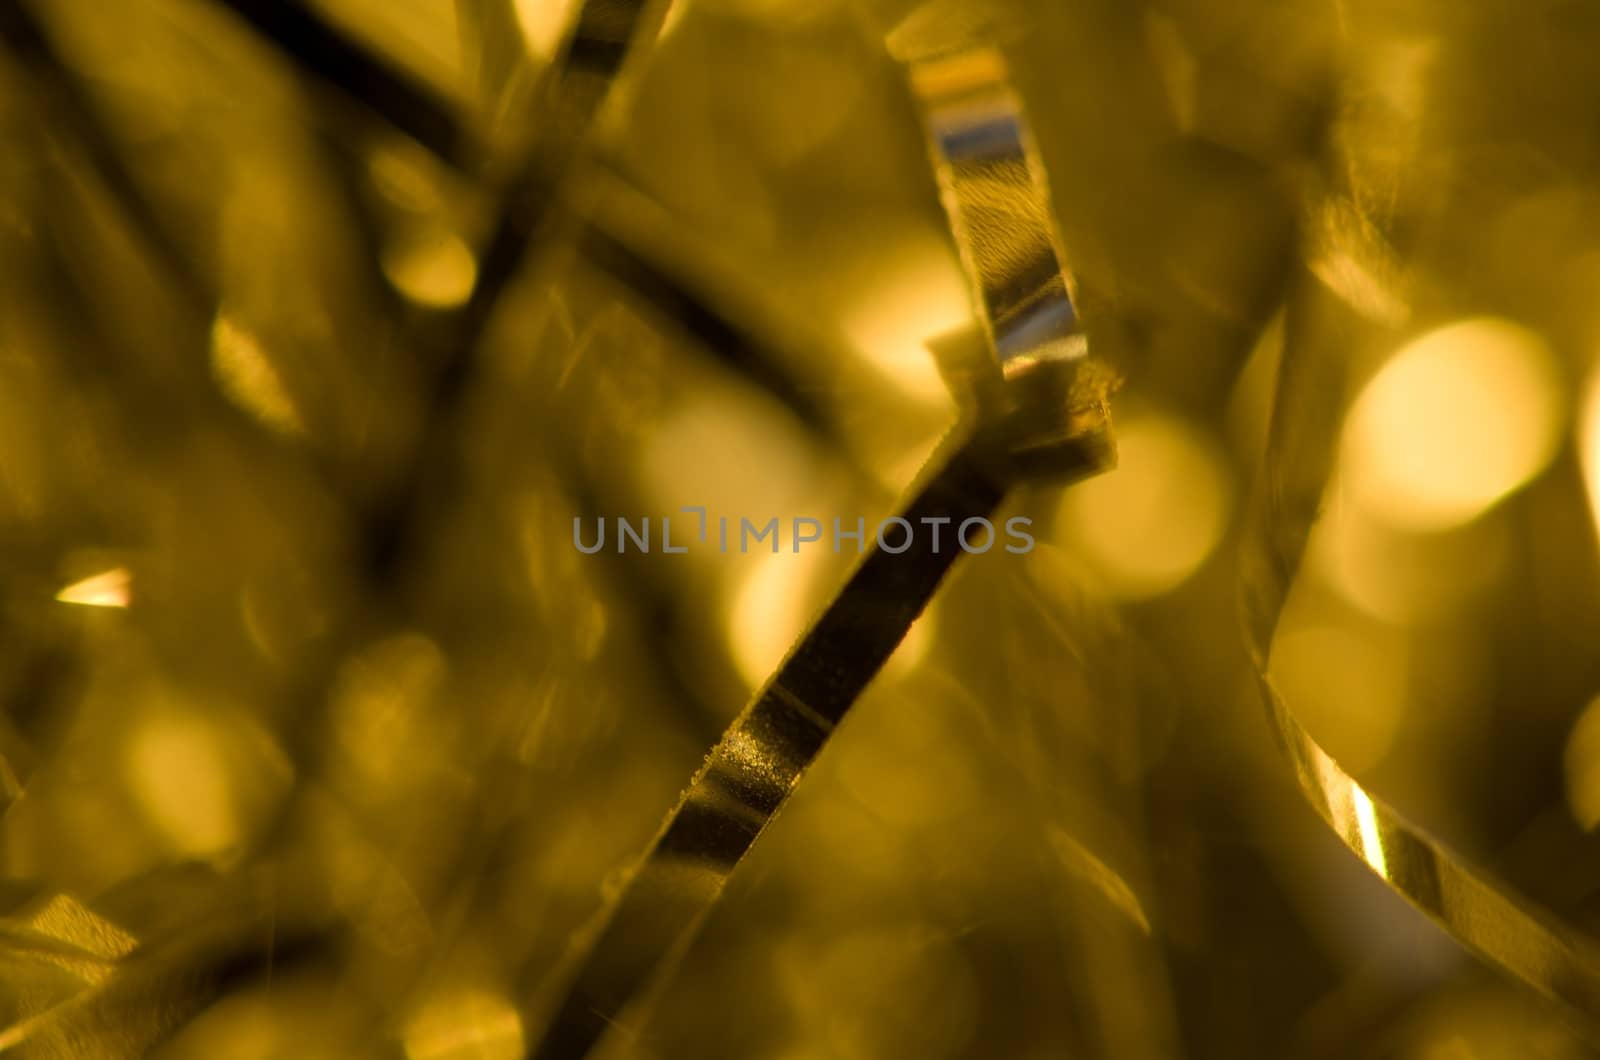 Golden abstract christmas background